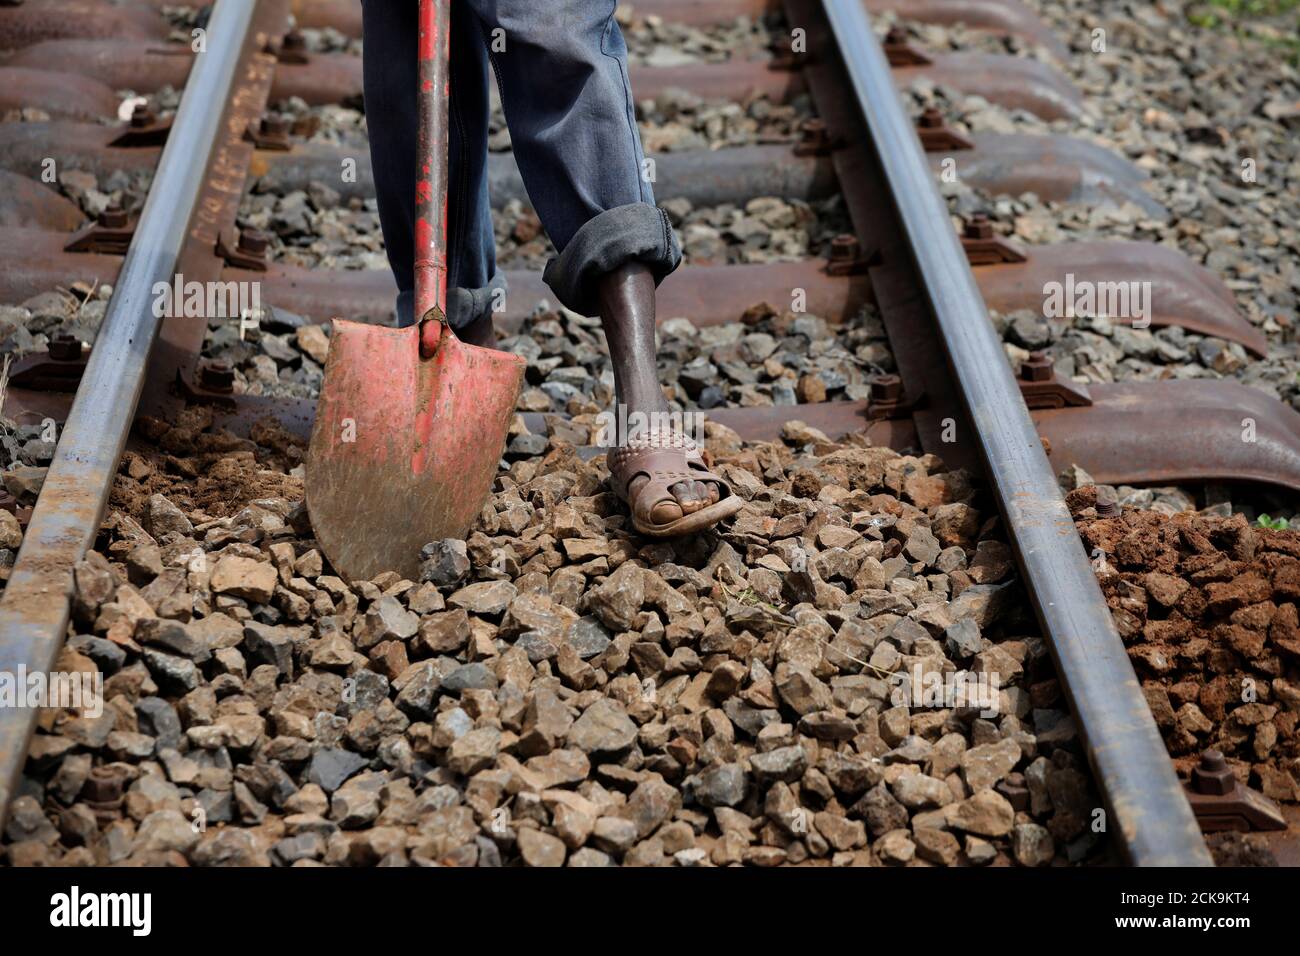 A worker fixes a section of the SGR railway track, near the town of Kiu  south of Nairobi, Kenya, December 16, 2019. REUTERS/Baz Ratner SEARCH " MOMBASA–NAIROBI TRAIN" FOR THIS STORY. SEARCH "WIDER